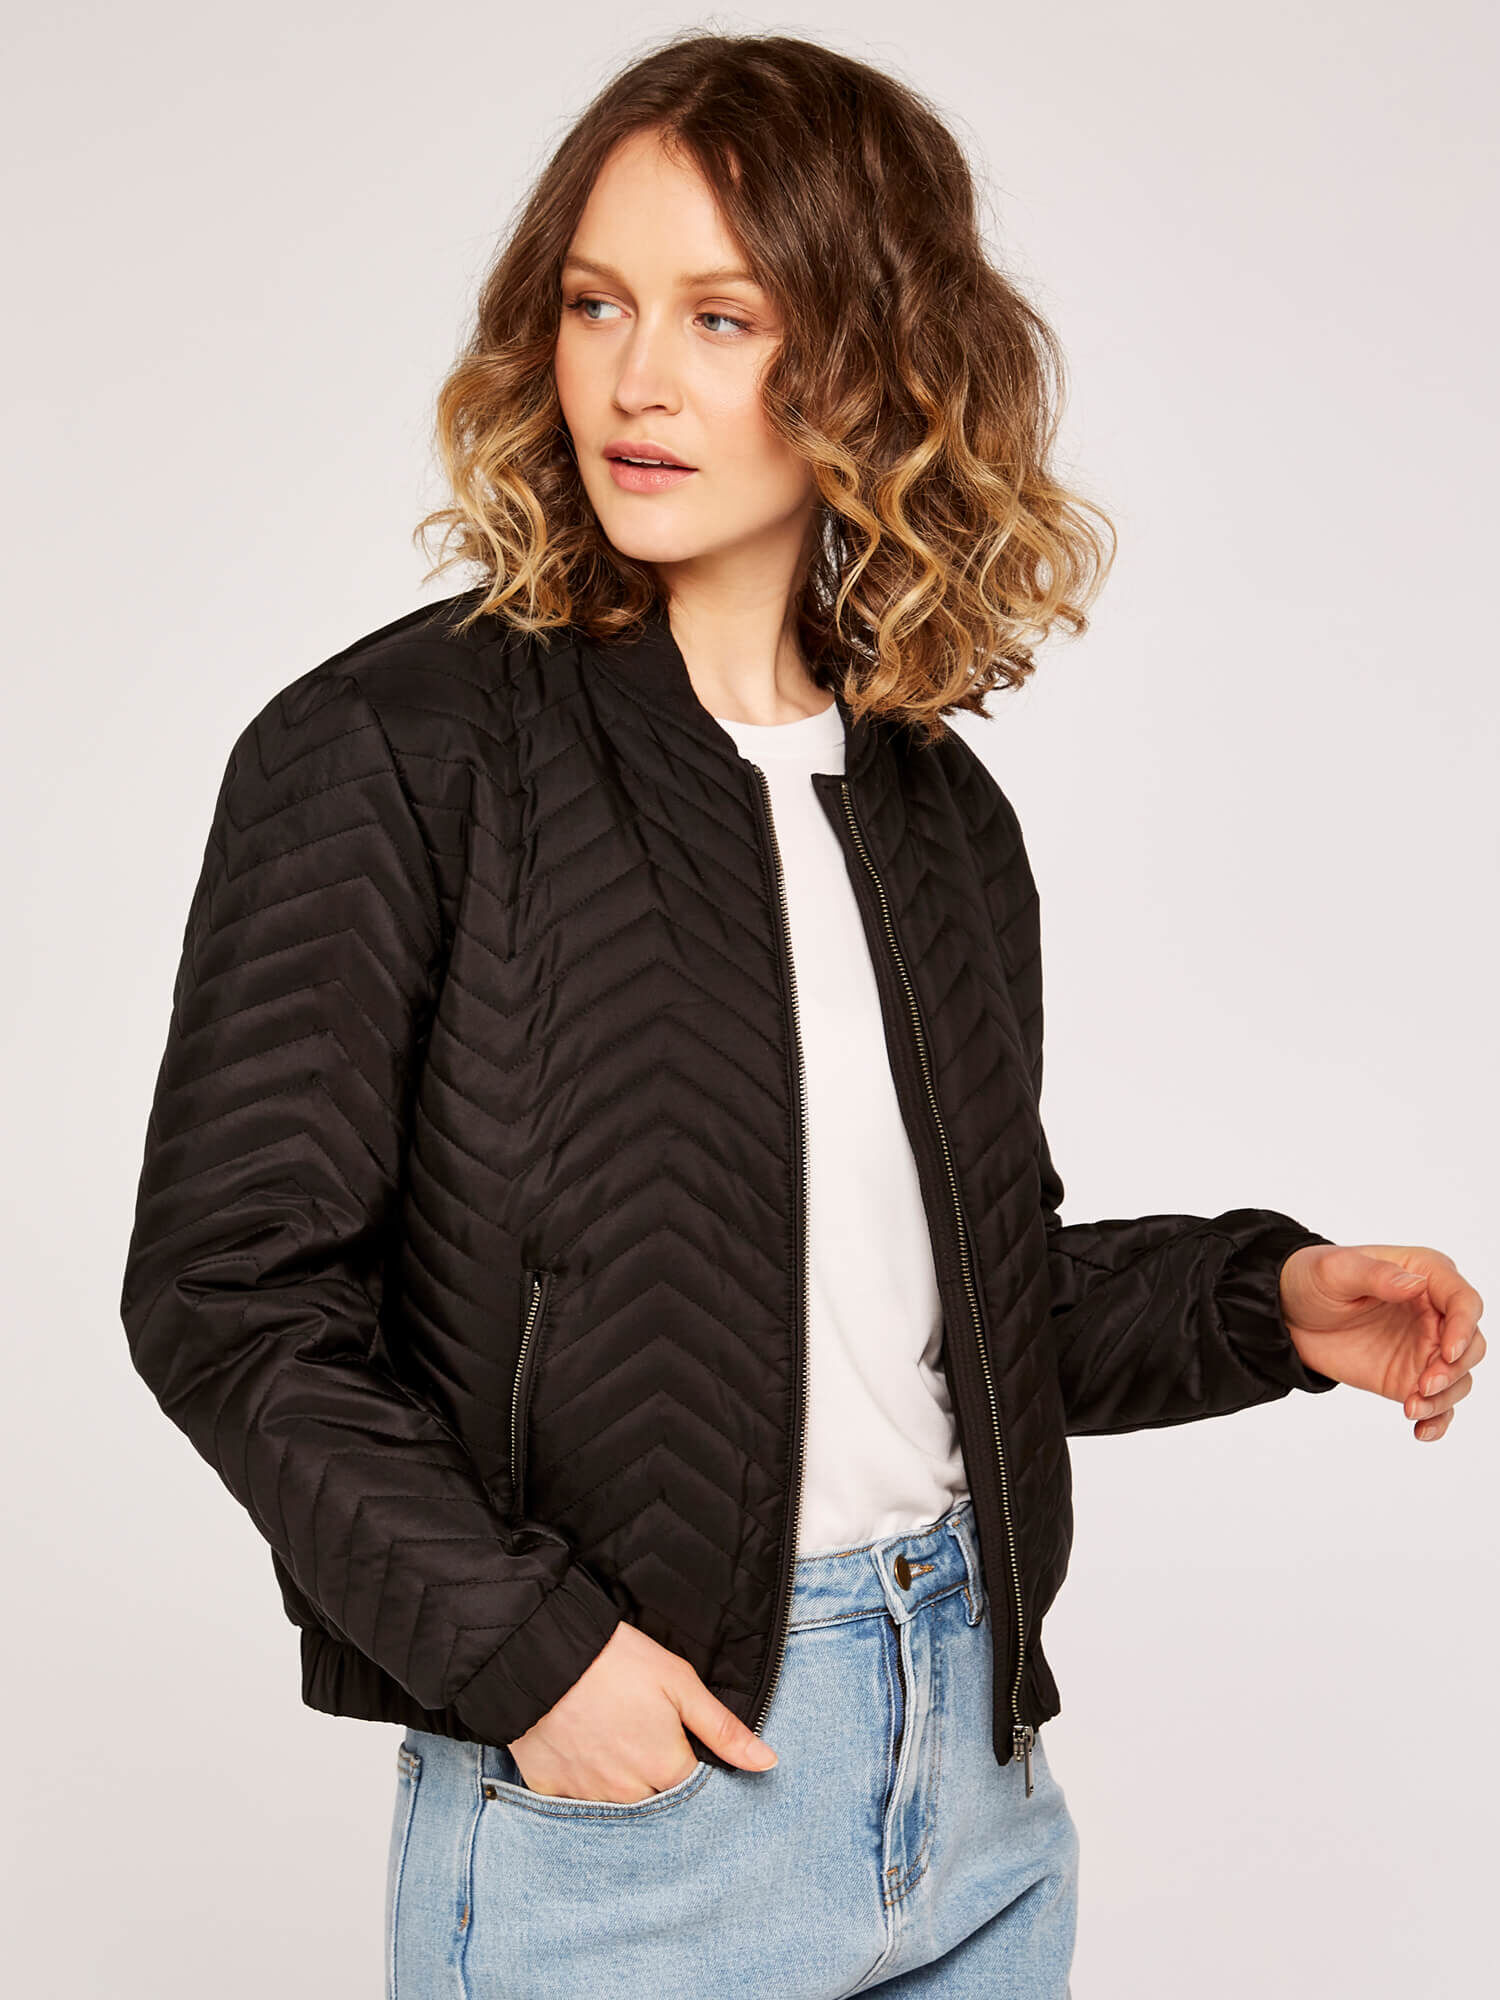 Quilted bomber jacket - Navy blue - Men | H&M IN